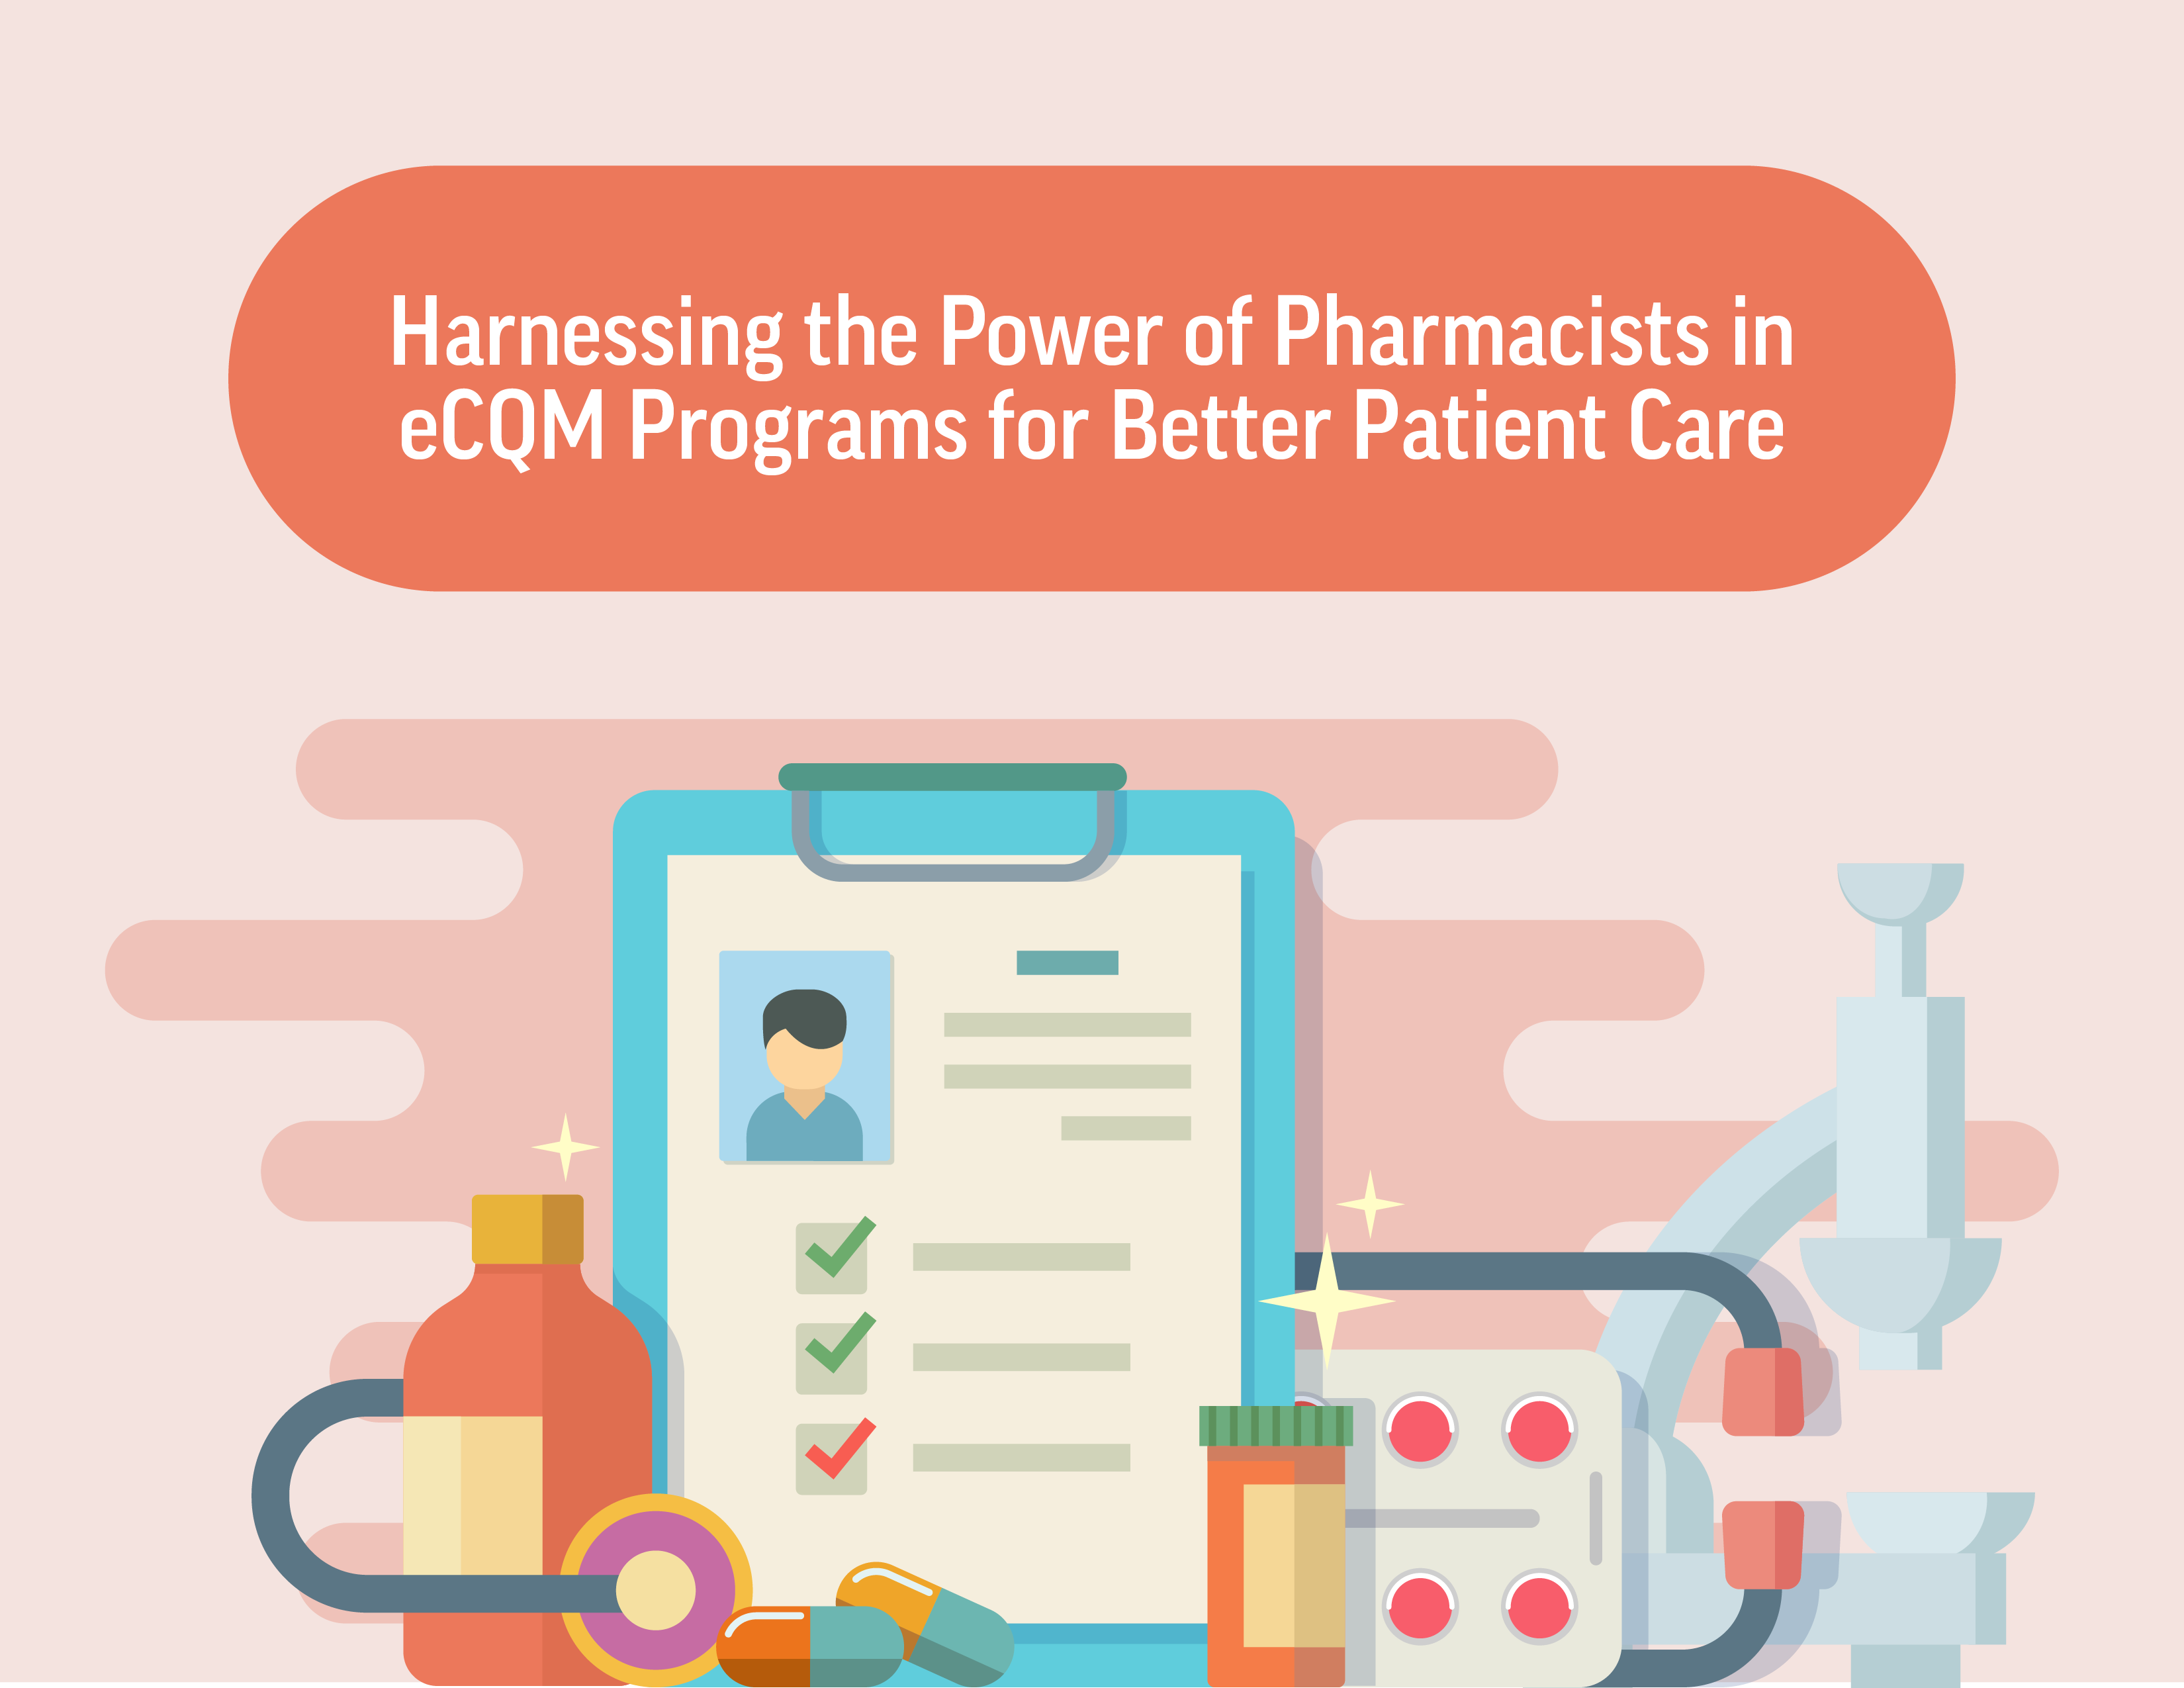 Harnessing the Power of Pharmacists in eCQM Programs for Better Patient Care